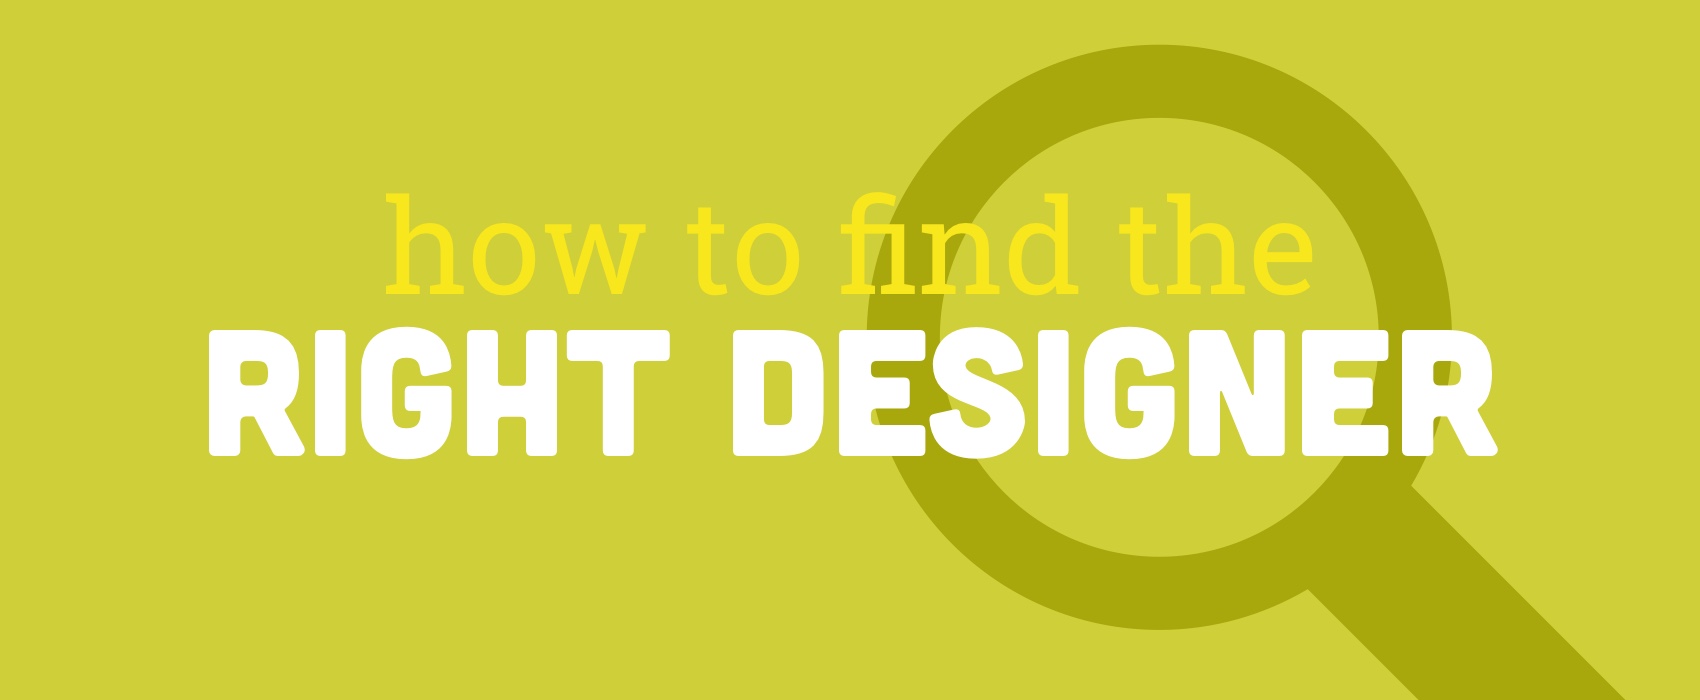 How to Find the Right Designer for Your Project